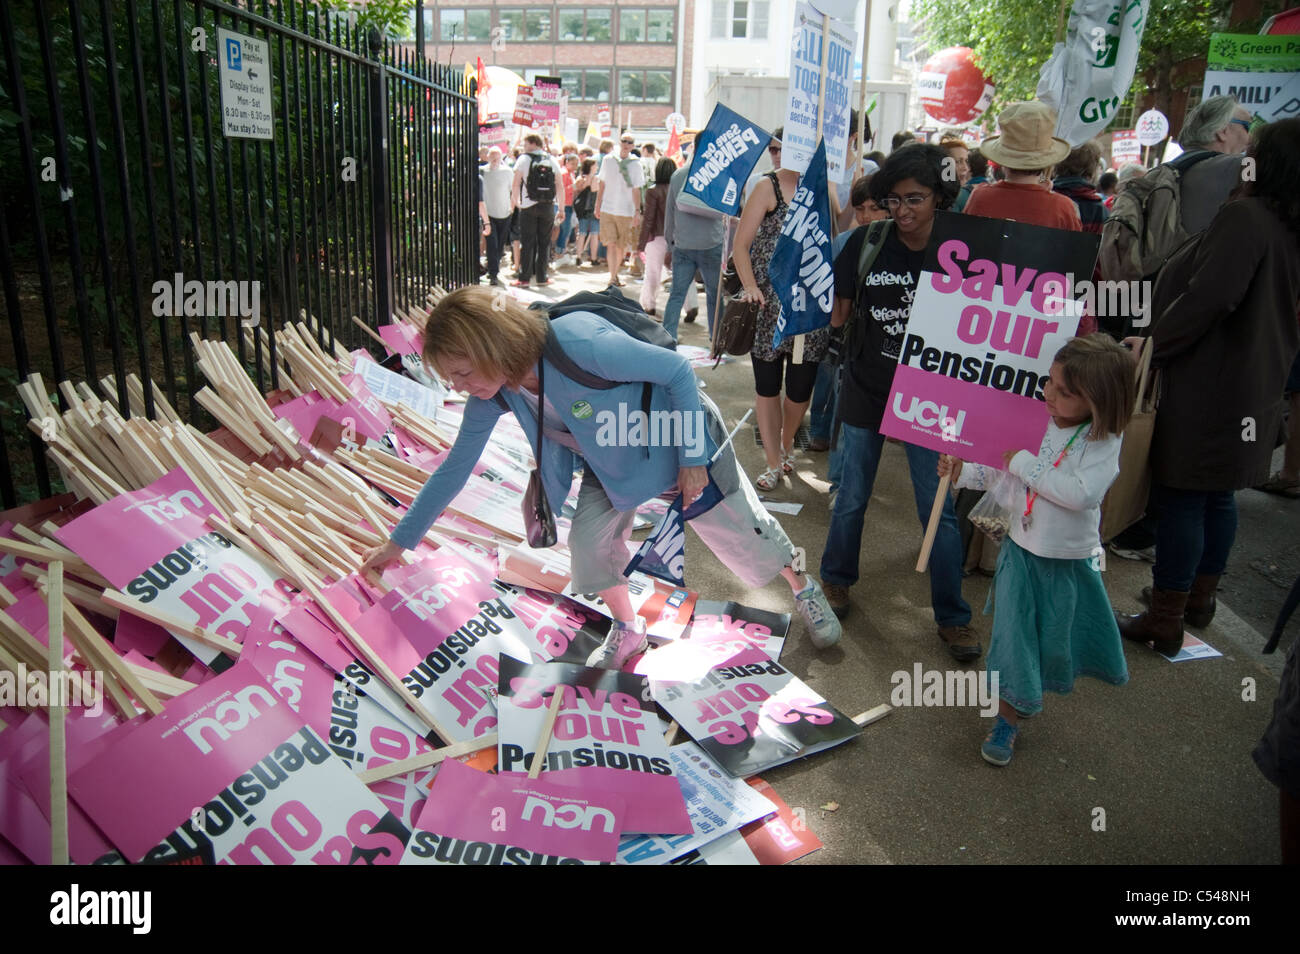 U.C.U. placards, one day strike by teachers and civil servants to protest at changes in pensions.June 30th 2011. Stock Photo